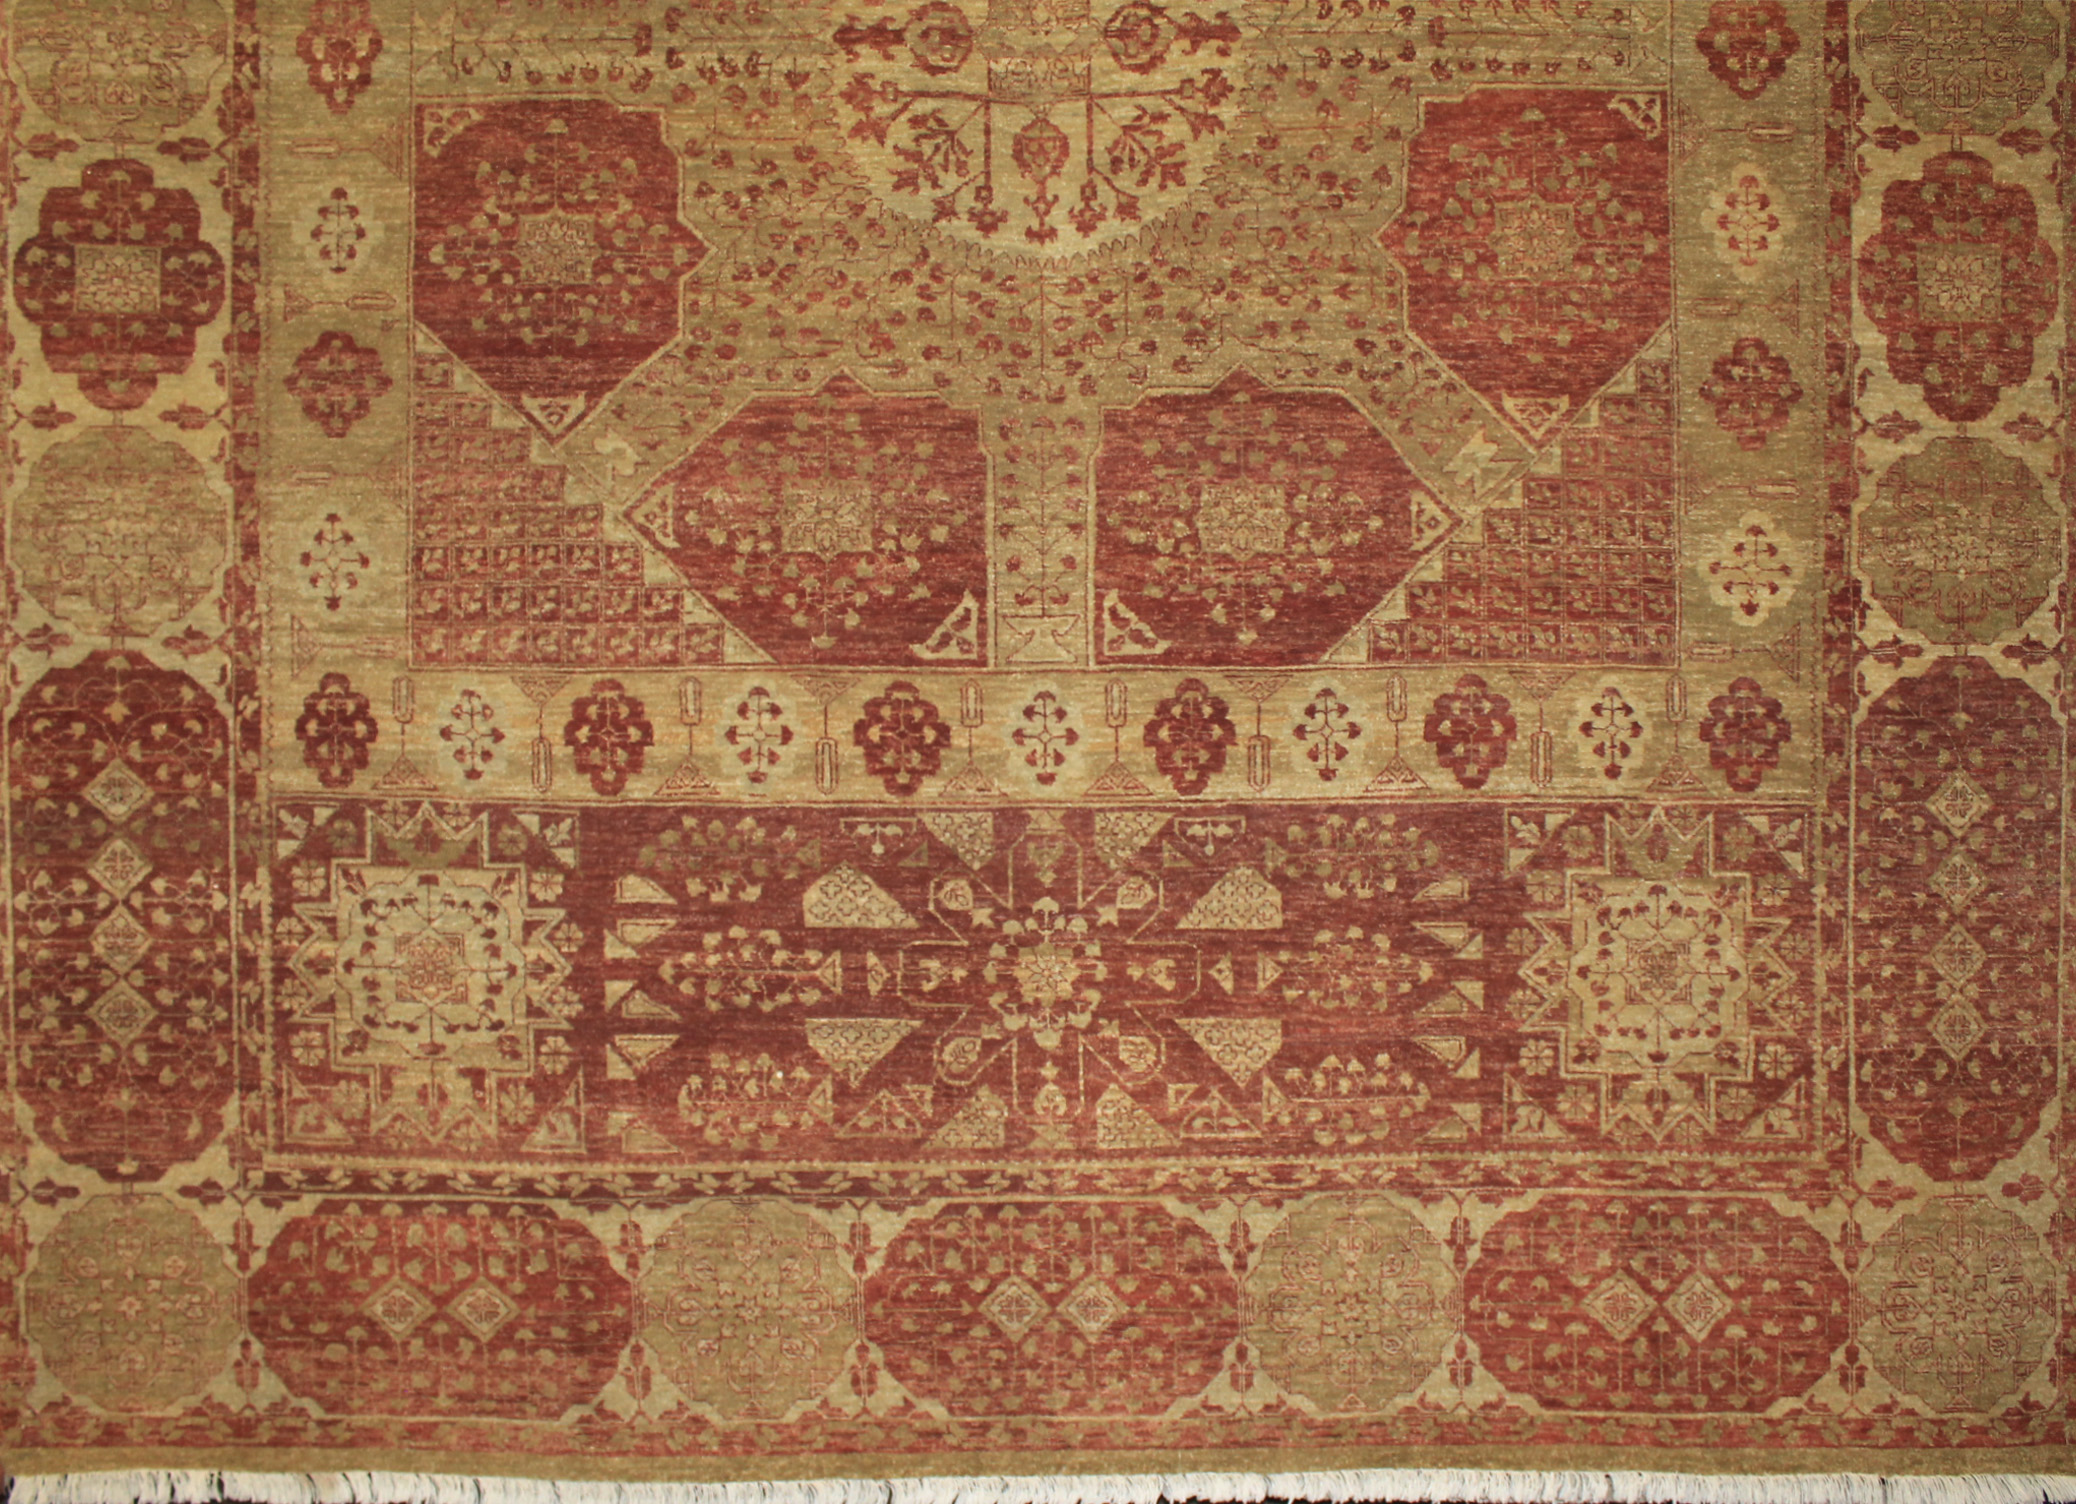 Clearance & Discount Rugs Antique Reproduction Hand Knotted Wool Rug 9034 Lt. Gold - Gold & Red - Burgundy Hand Knotted Rug